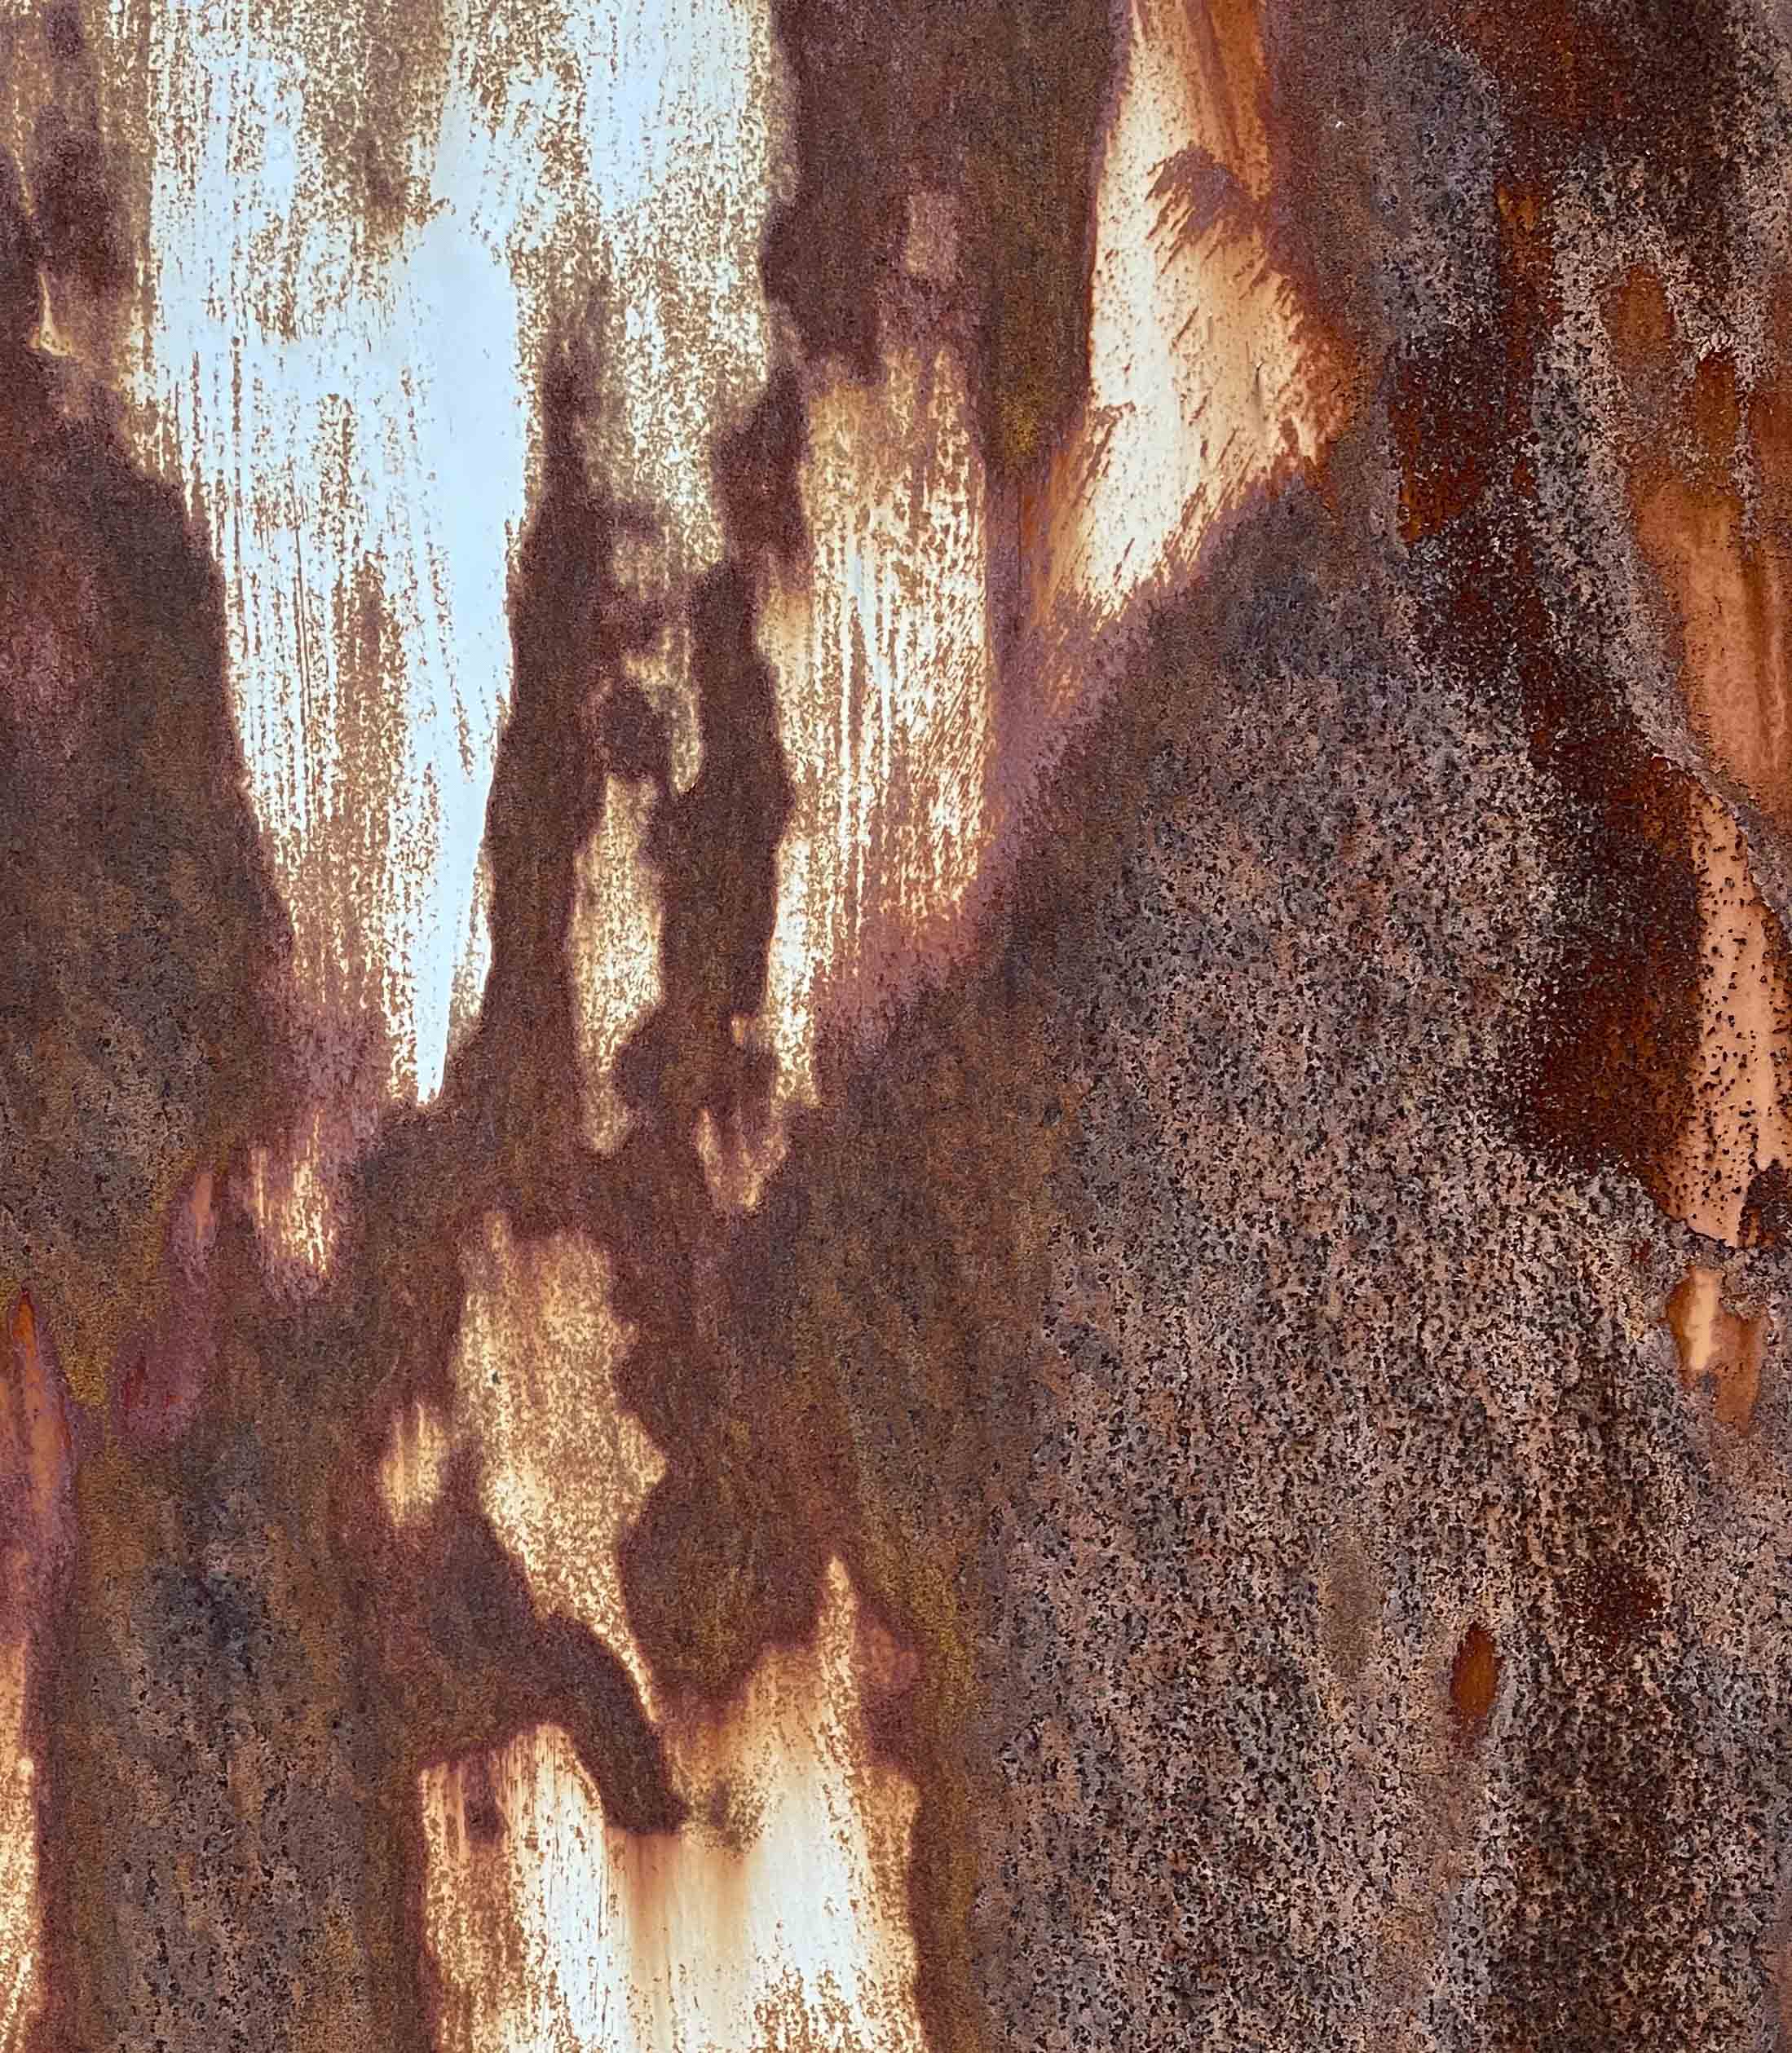 Rusty abstraction, Mike Chapman